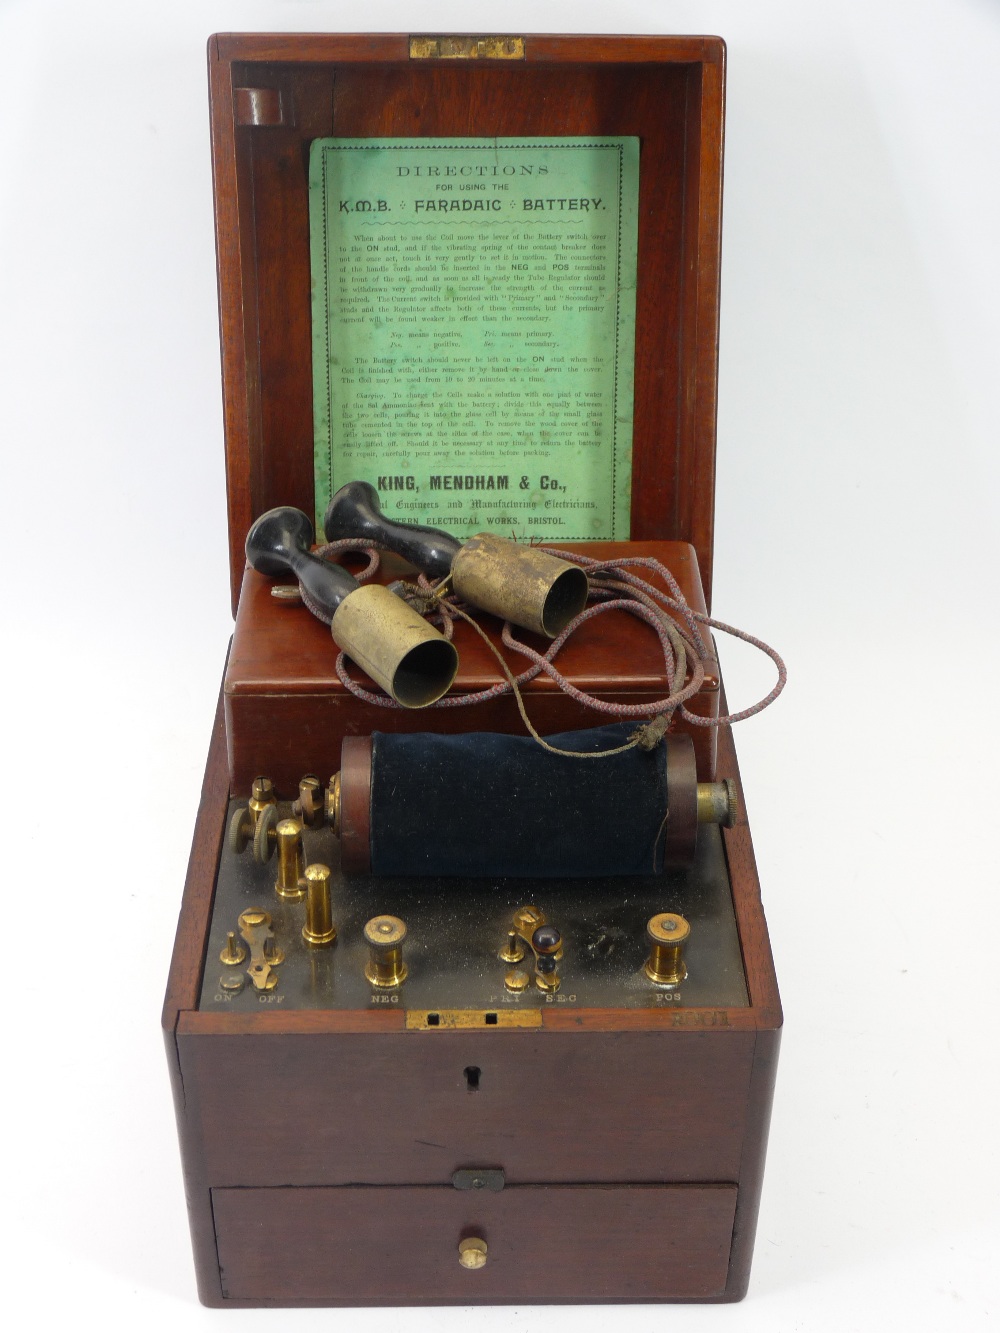 VINTAGE ELECTRICAL ENGINEER EQUIPMENT - Faradaic battery by King, Mendham & Company in wooden box